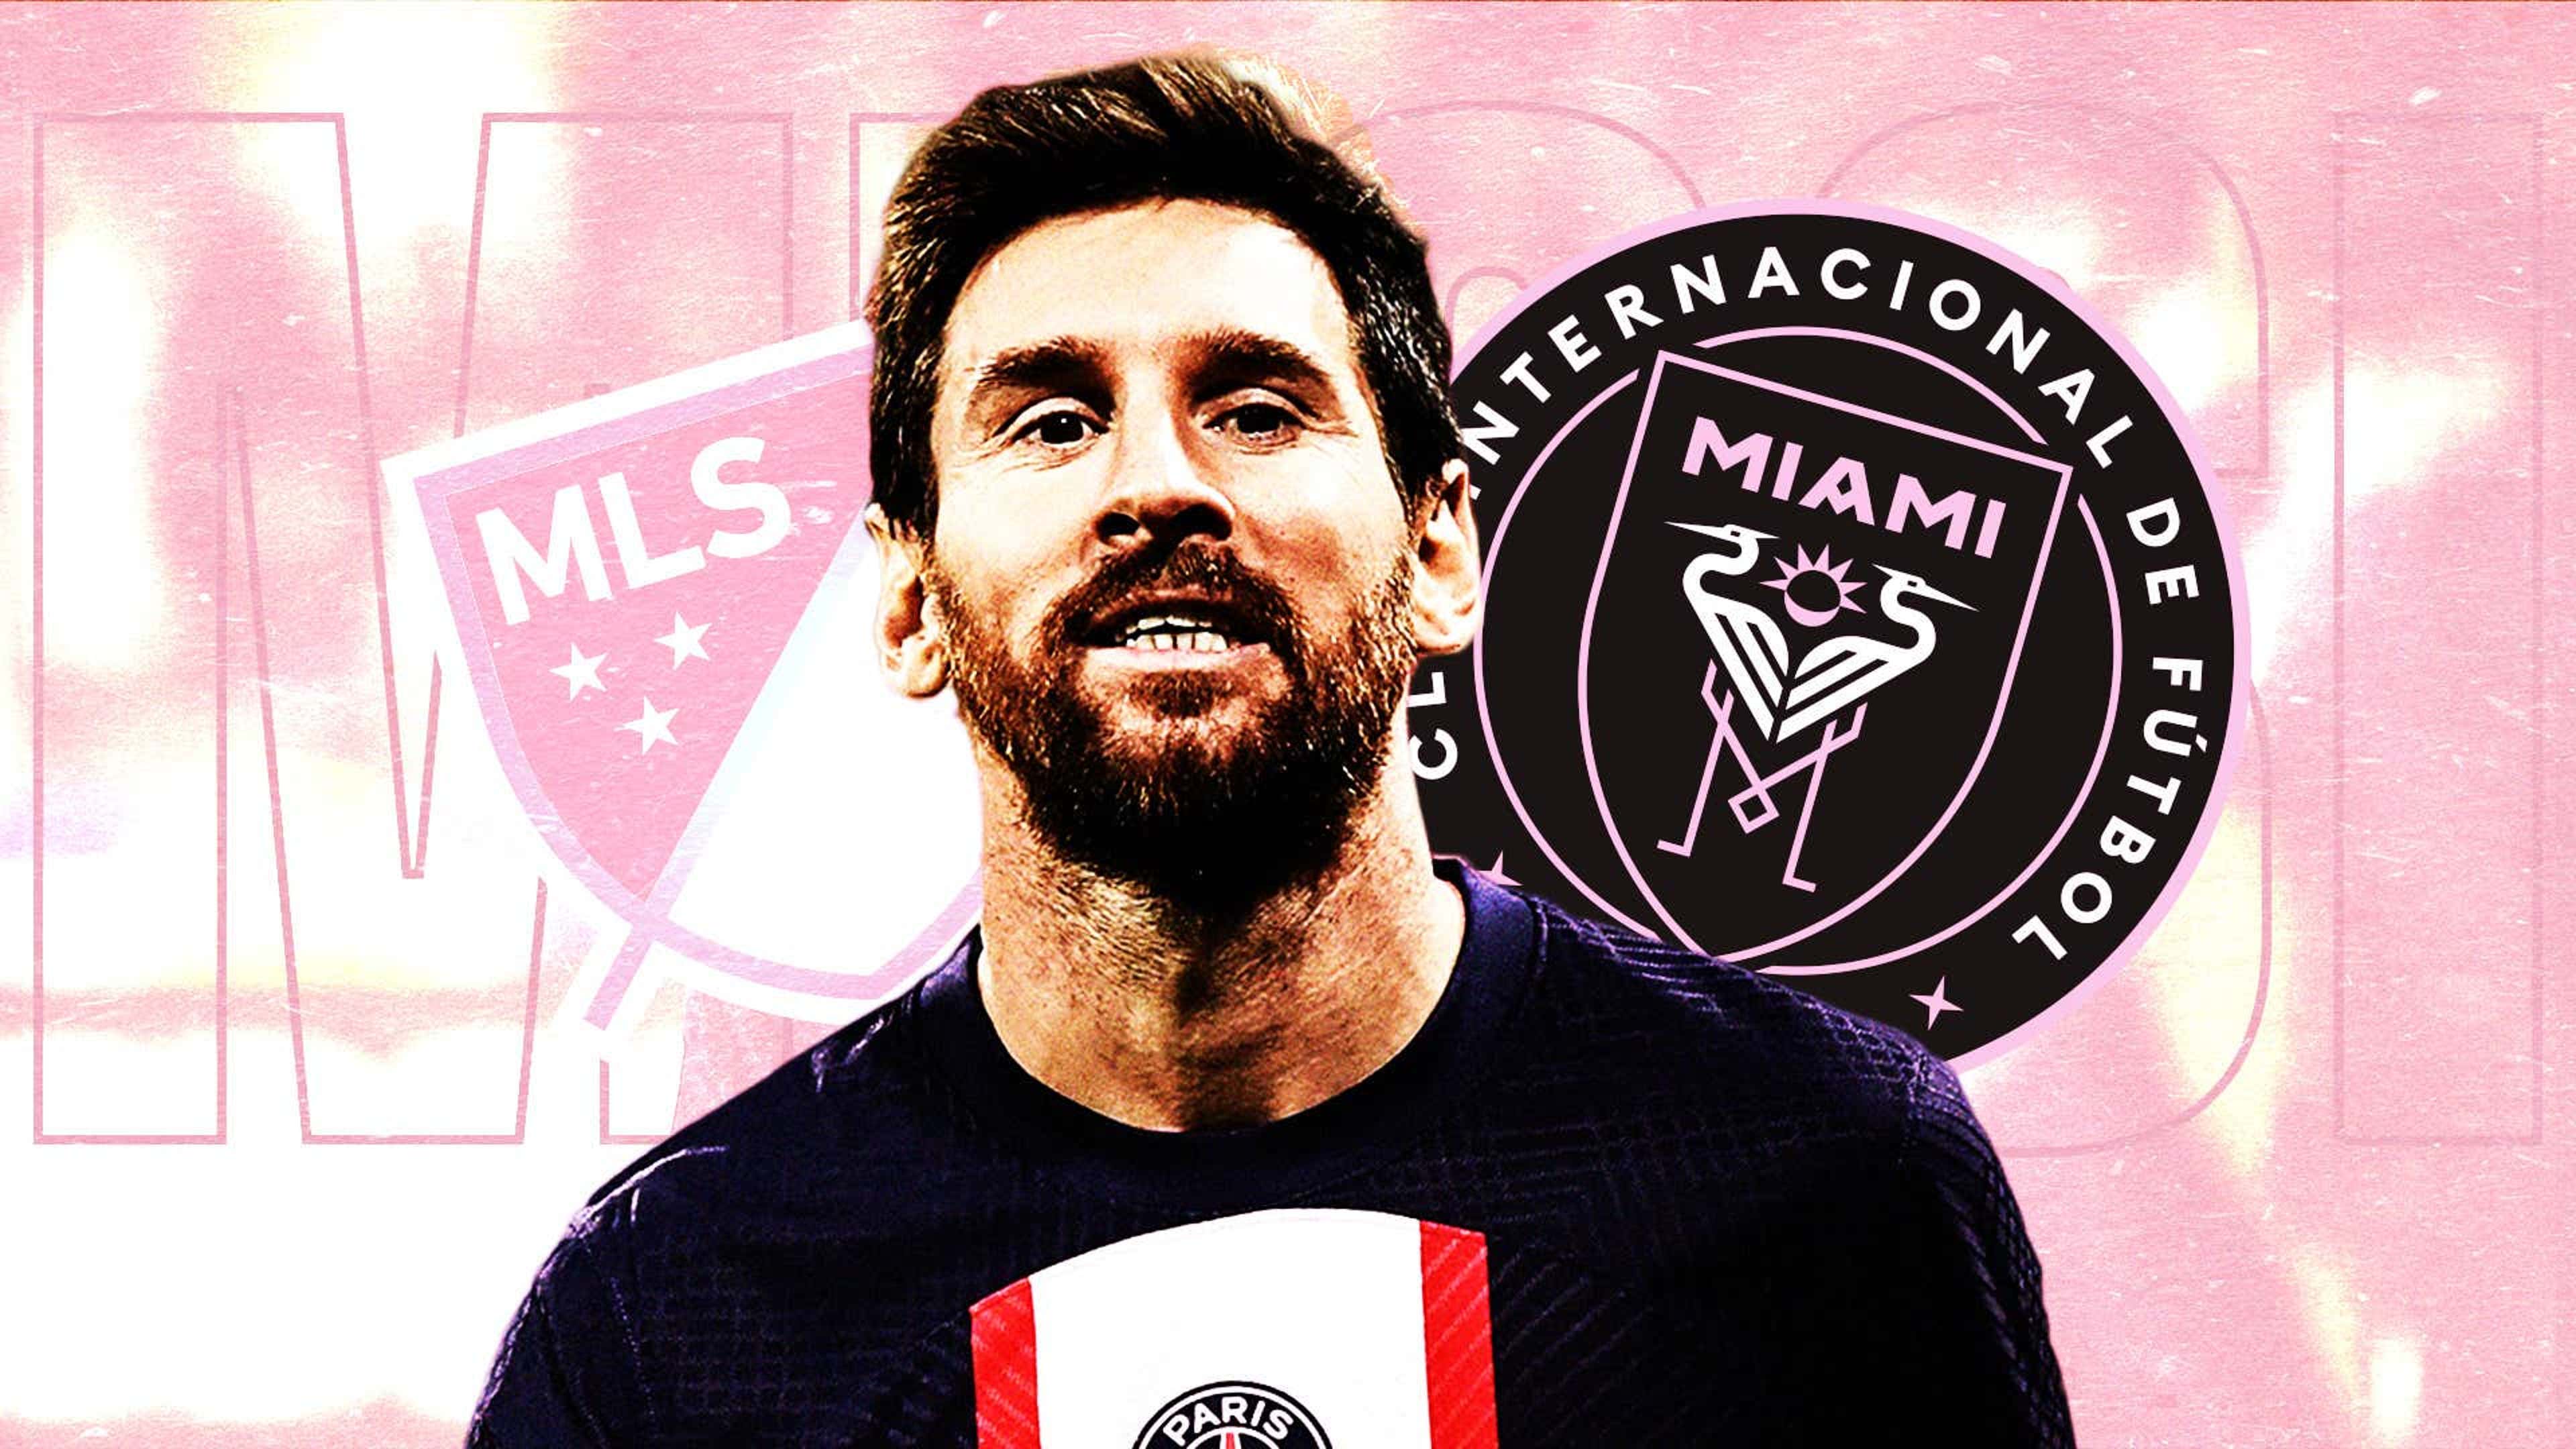 Soccer Legend Lionel Messi To Play for Inter Miami—Here's Messi's Net Worth